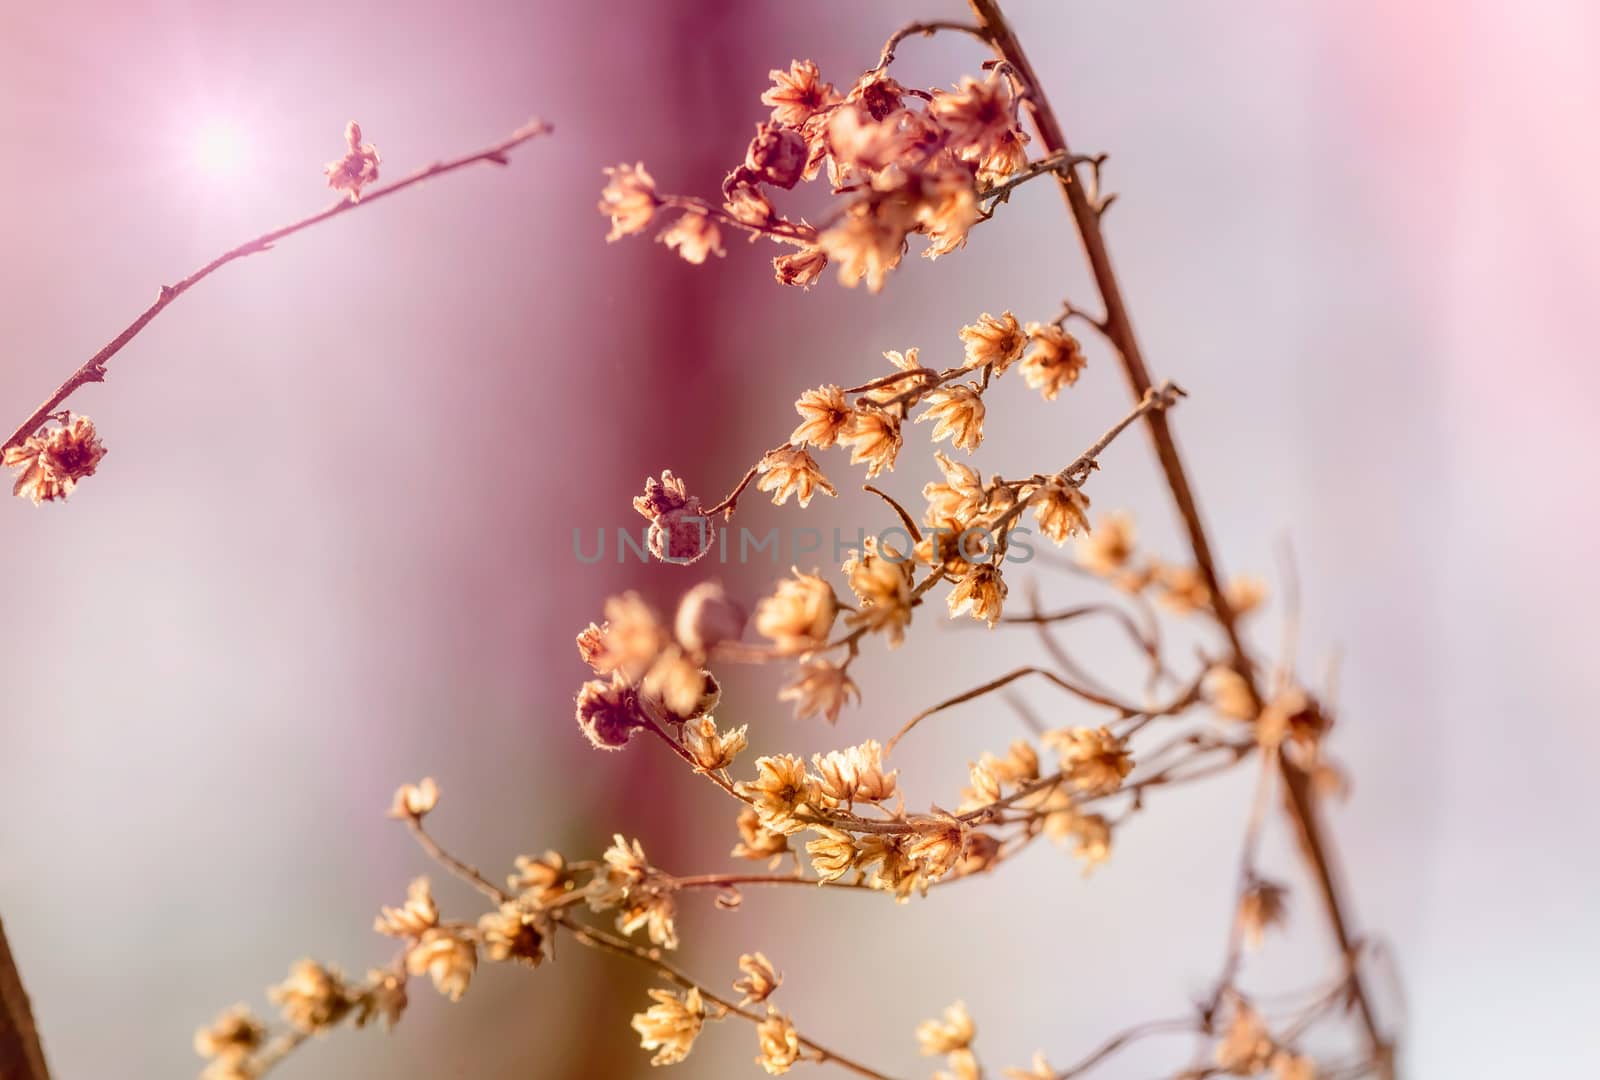 A branch with dry flower at the end of winter, why a tepid spring sun in the pink background